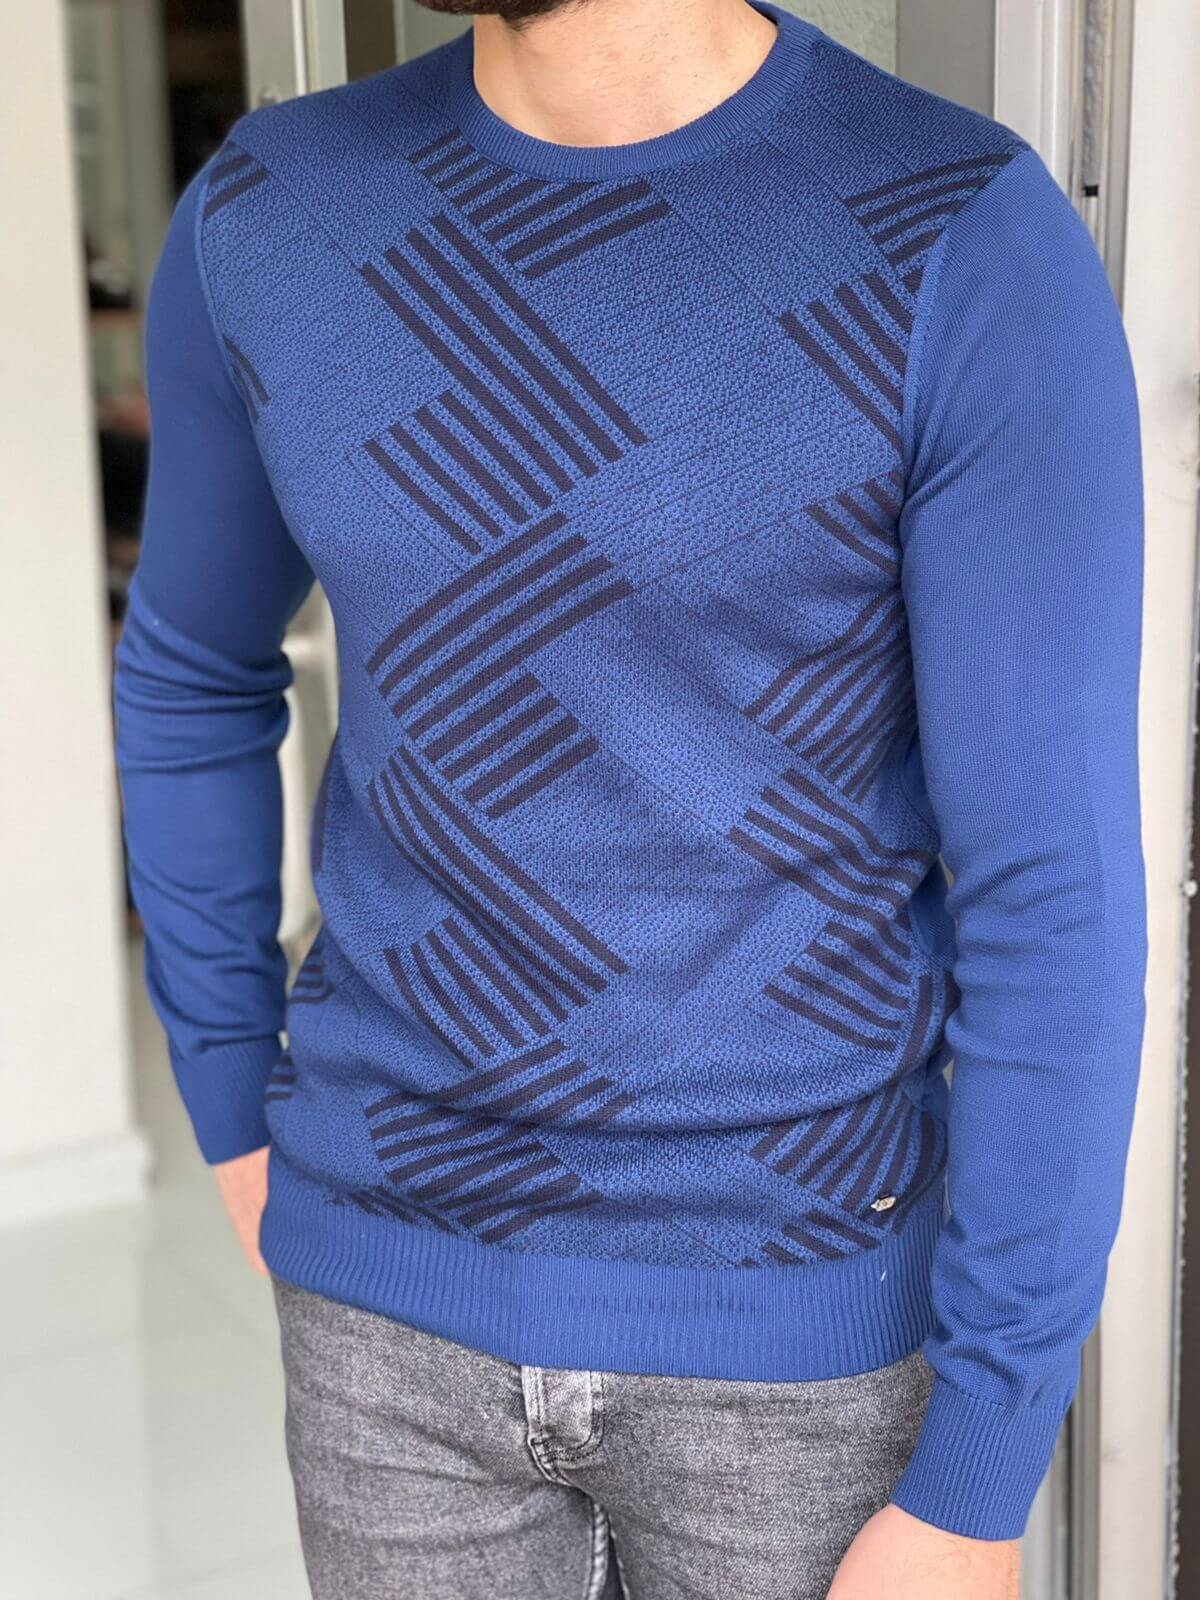 A crewneck sweater with a saxophone pattern. The sweater features a unique design with vibrant colors and intricate saxophone illustrations.